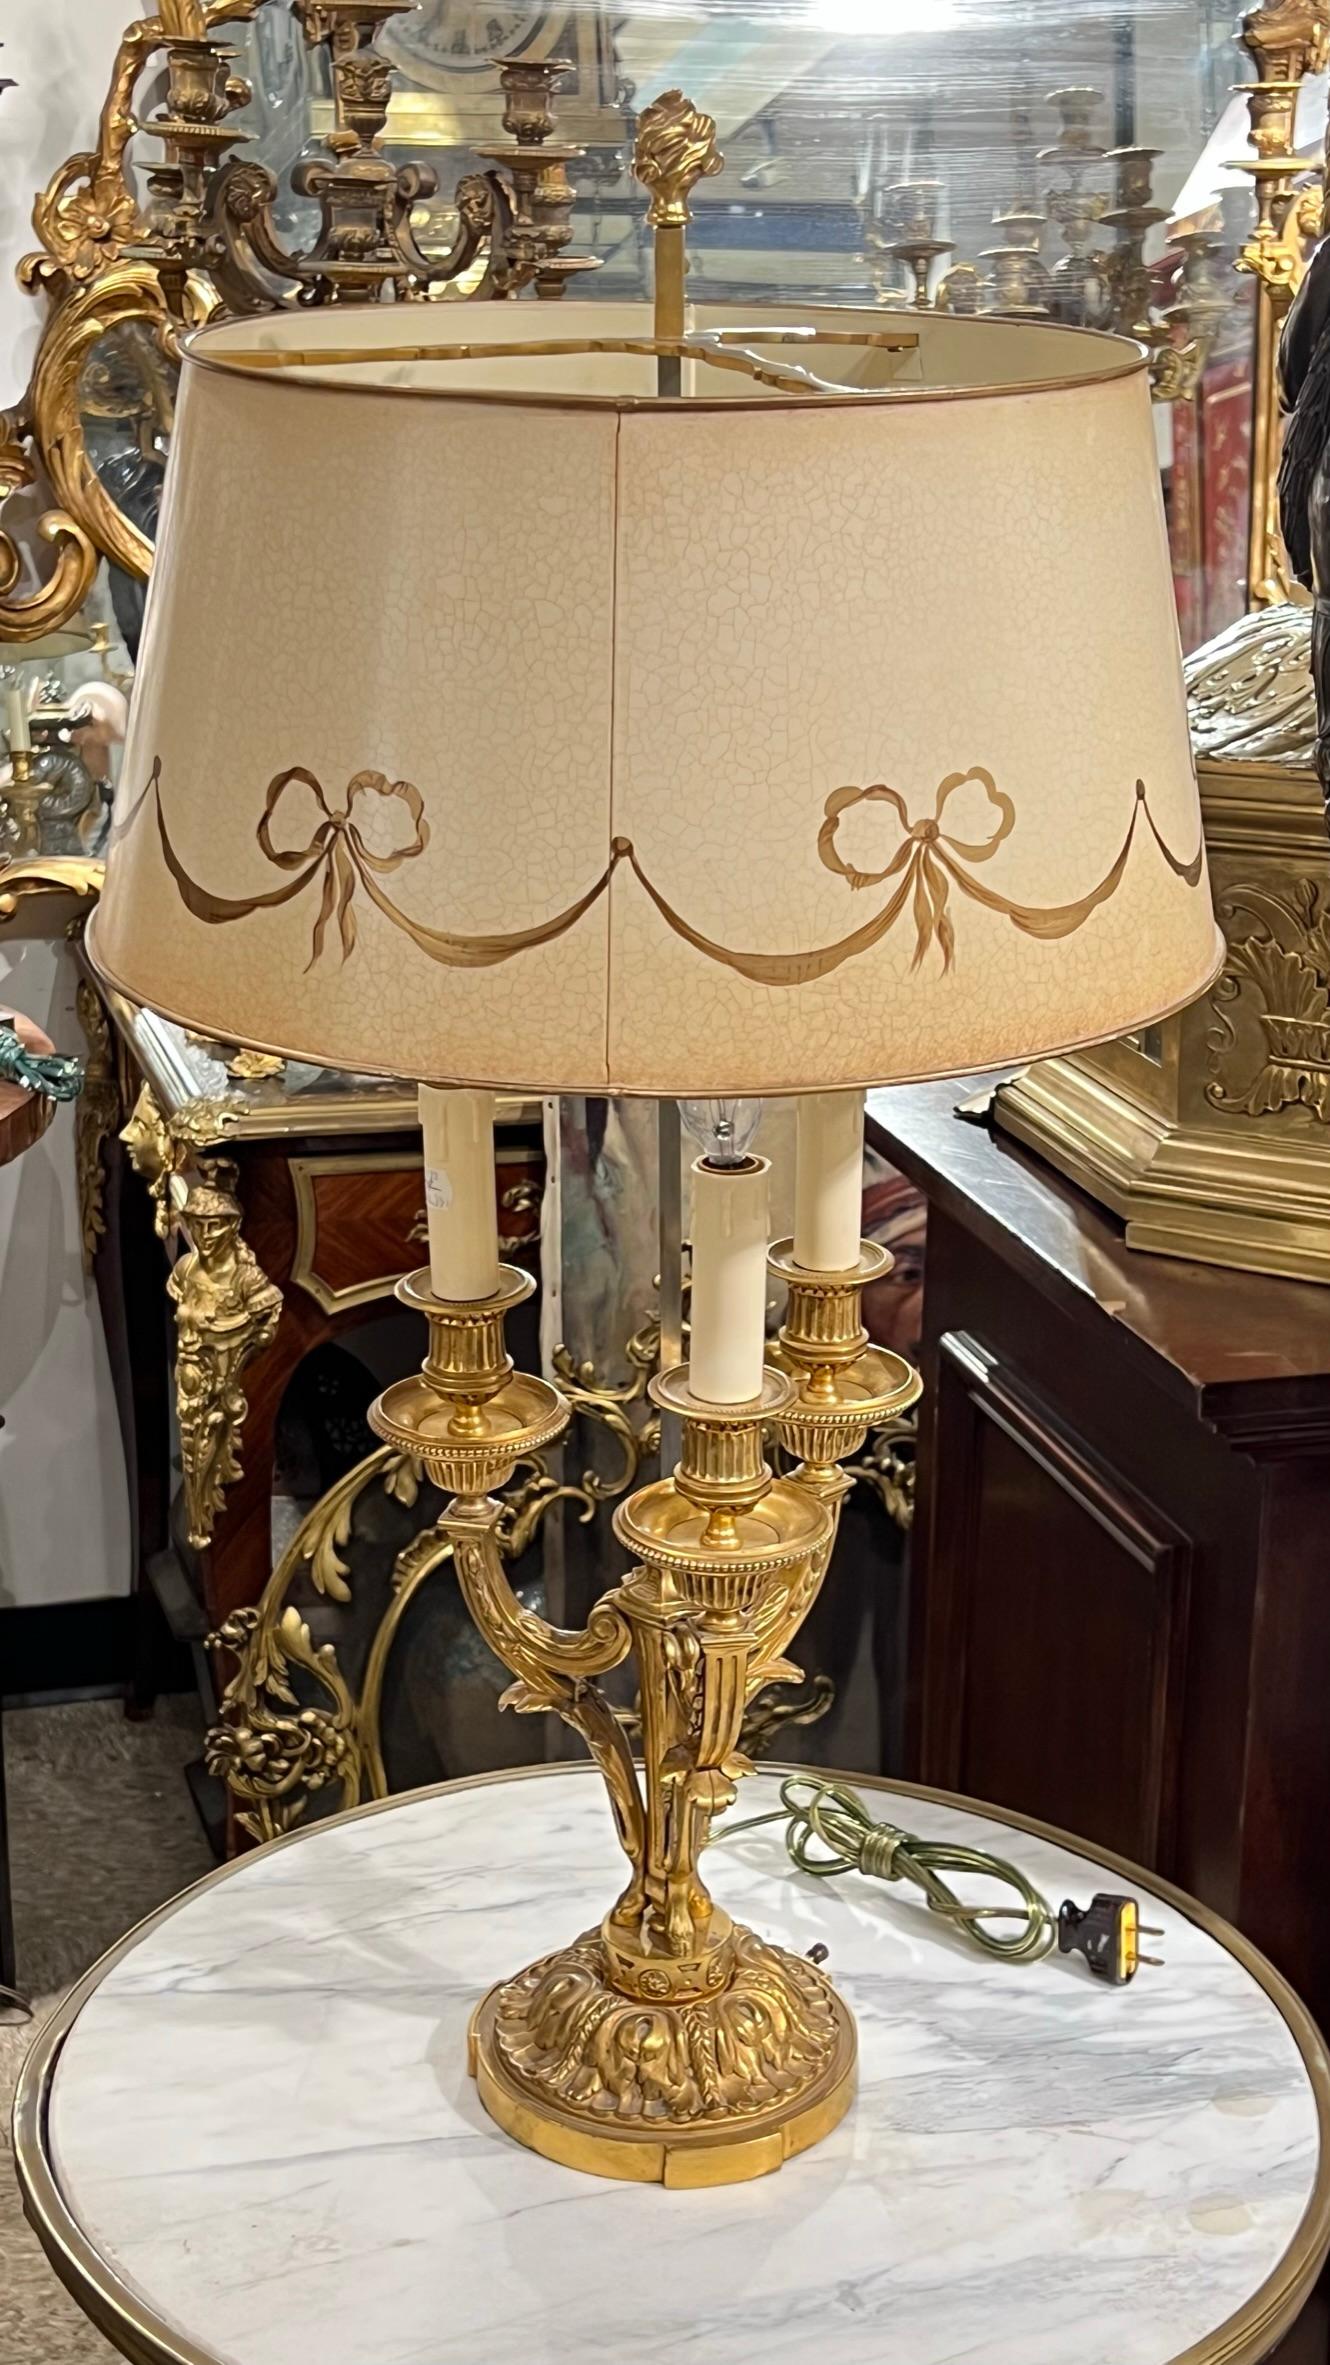 Pair of French 19 century  gilt bronze French bouillotte Lamps with hand-painted metal shades, with wiring and sockets, ready for use.
The Candelabras are 19 century and converted to electrical lamps in the 20th century with hand painted tole shades.